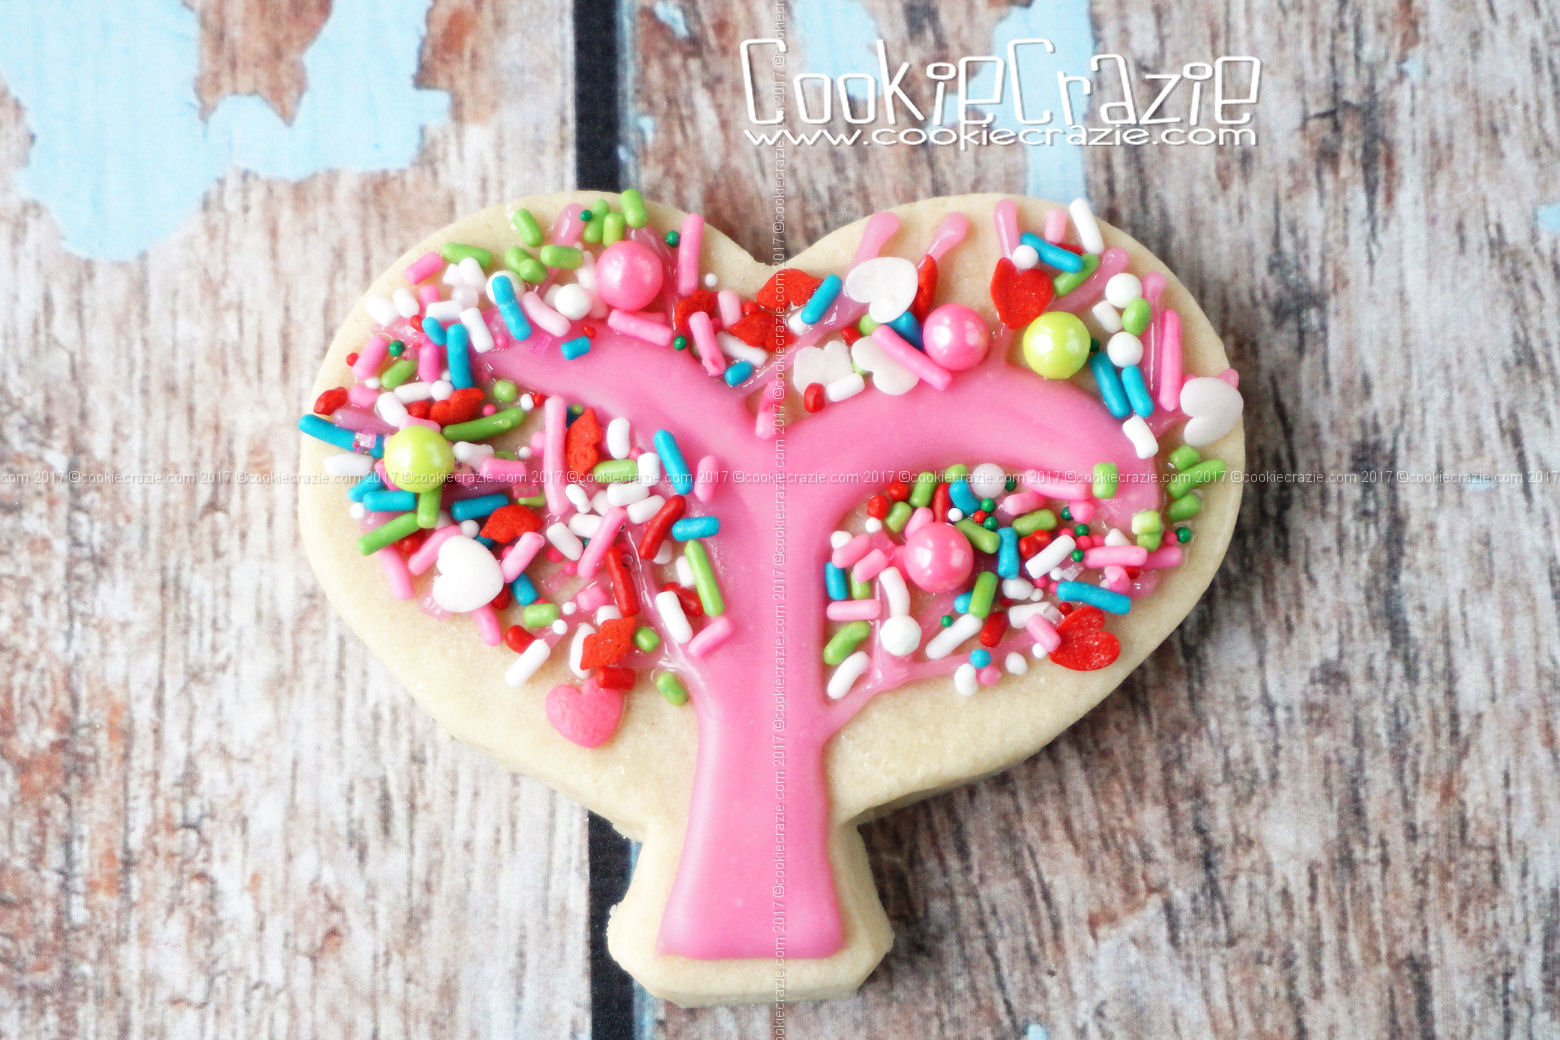  Heart Tree with Sprinkles Decorated Sugar Cookie YouTube video  HERE  